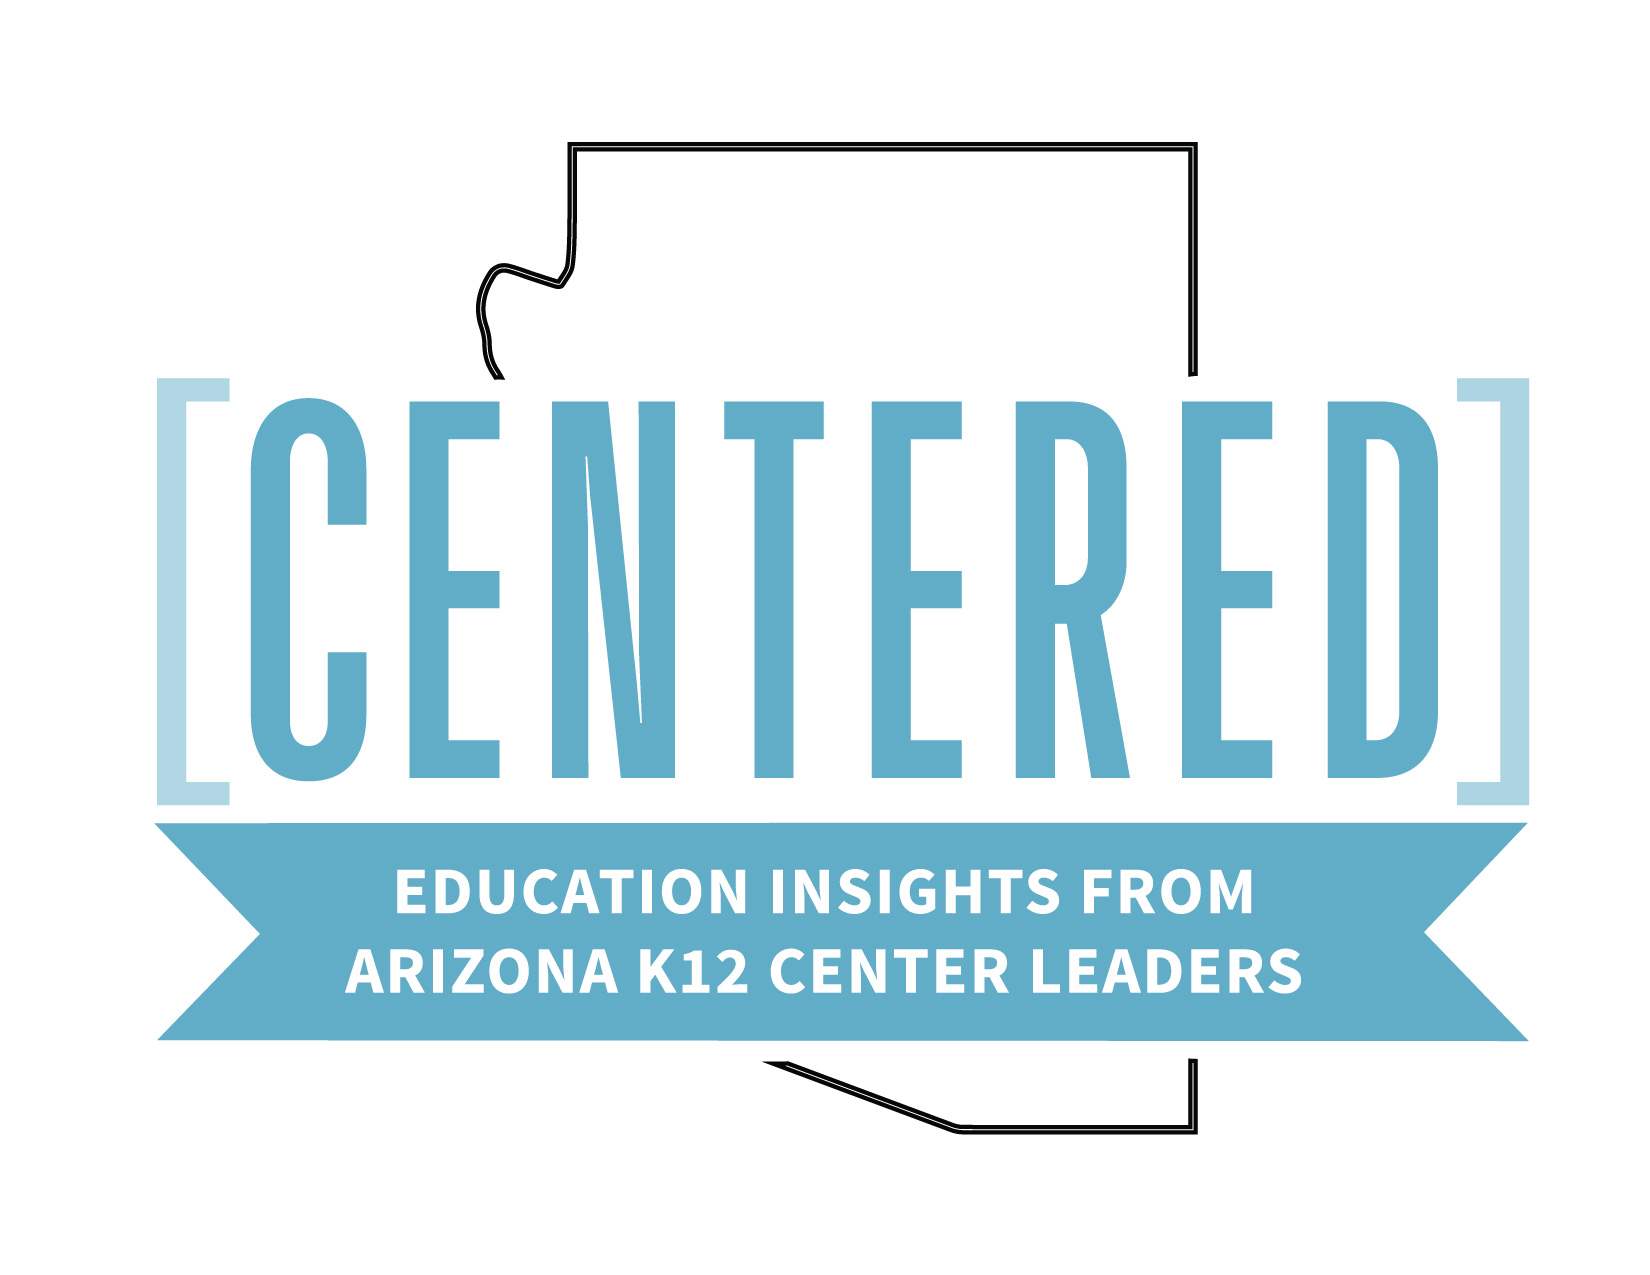 Meet 3Ps in a Pod: The Arizona K12 Centered Podcast